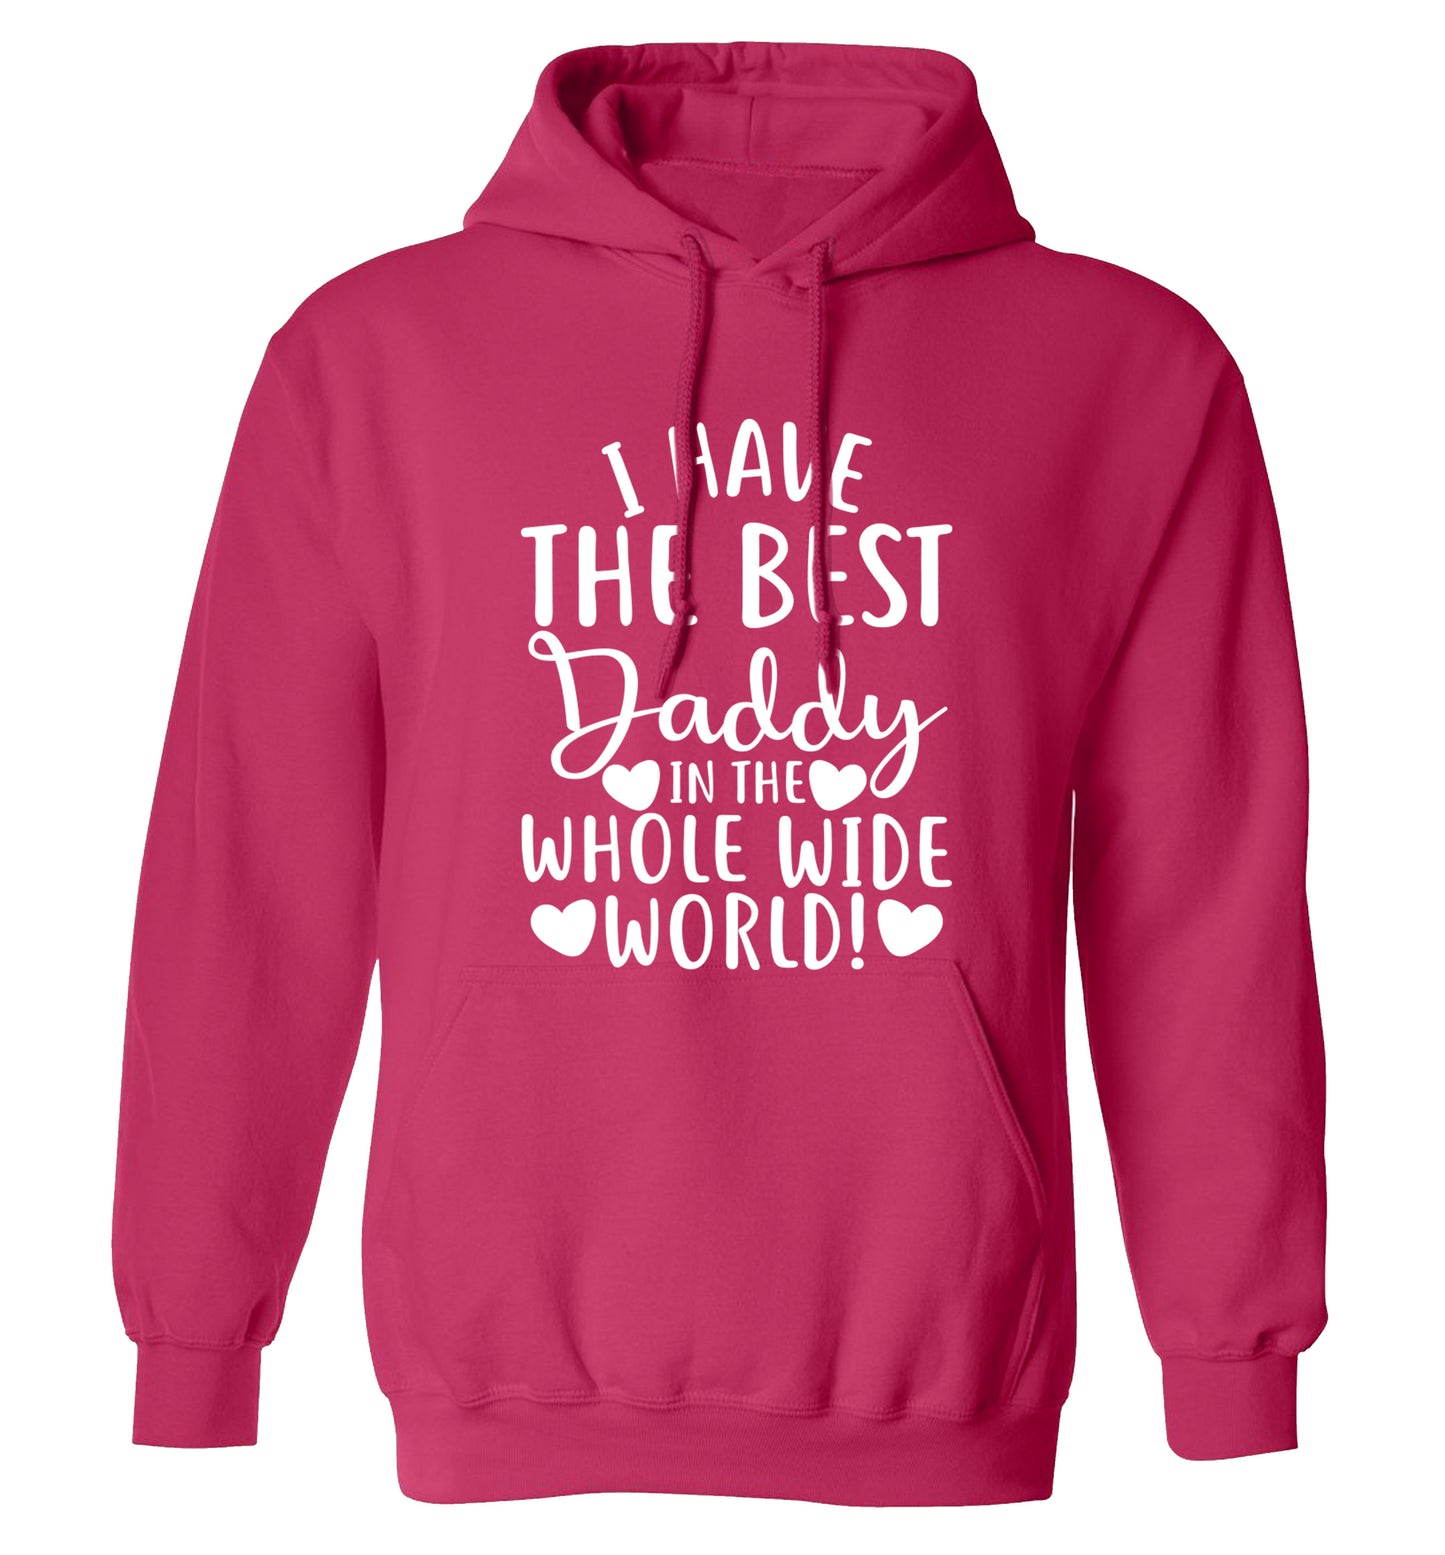 I have the best daddy in the whole wide world adults unisex pink hoodie 2XL